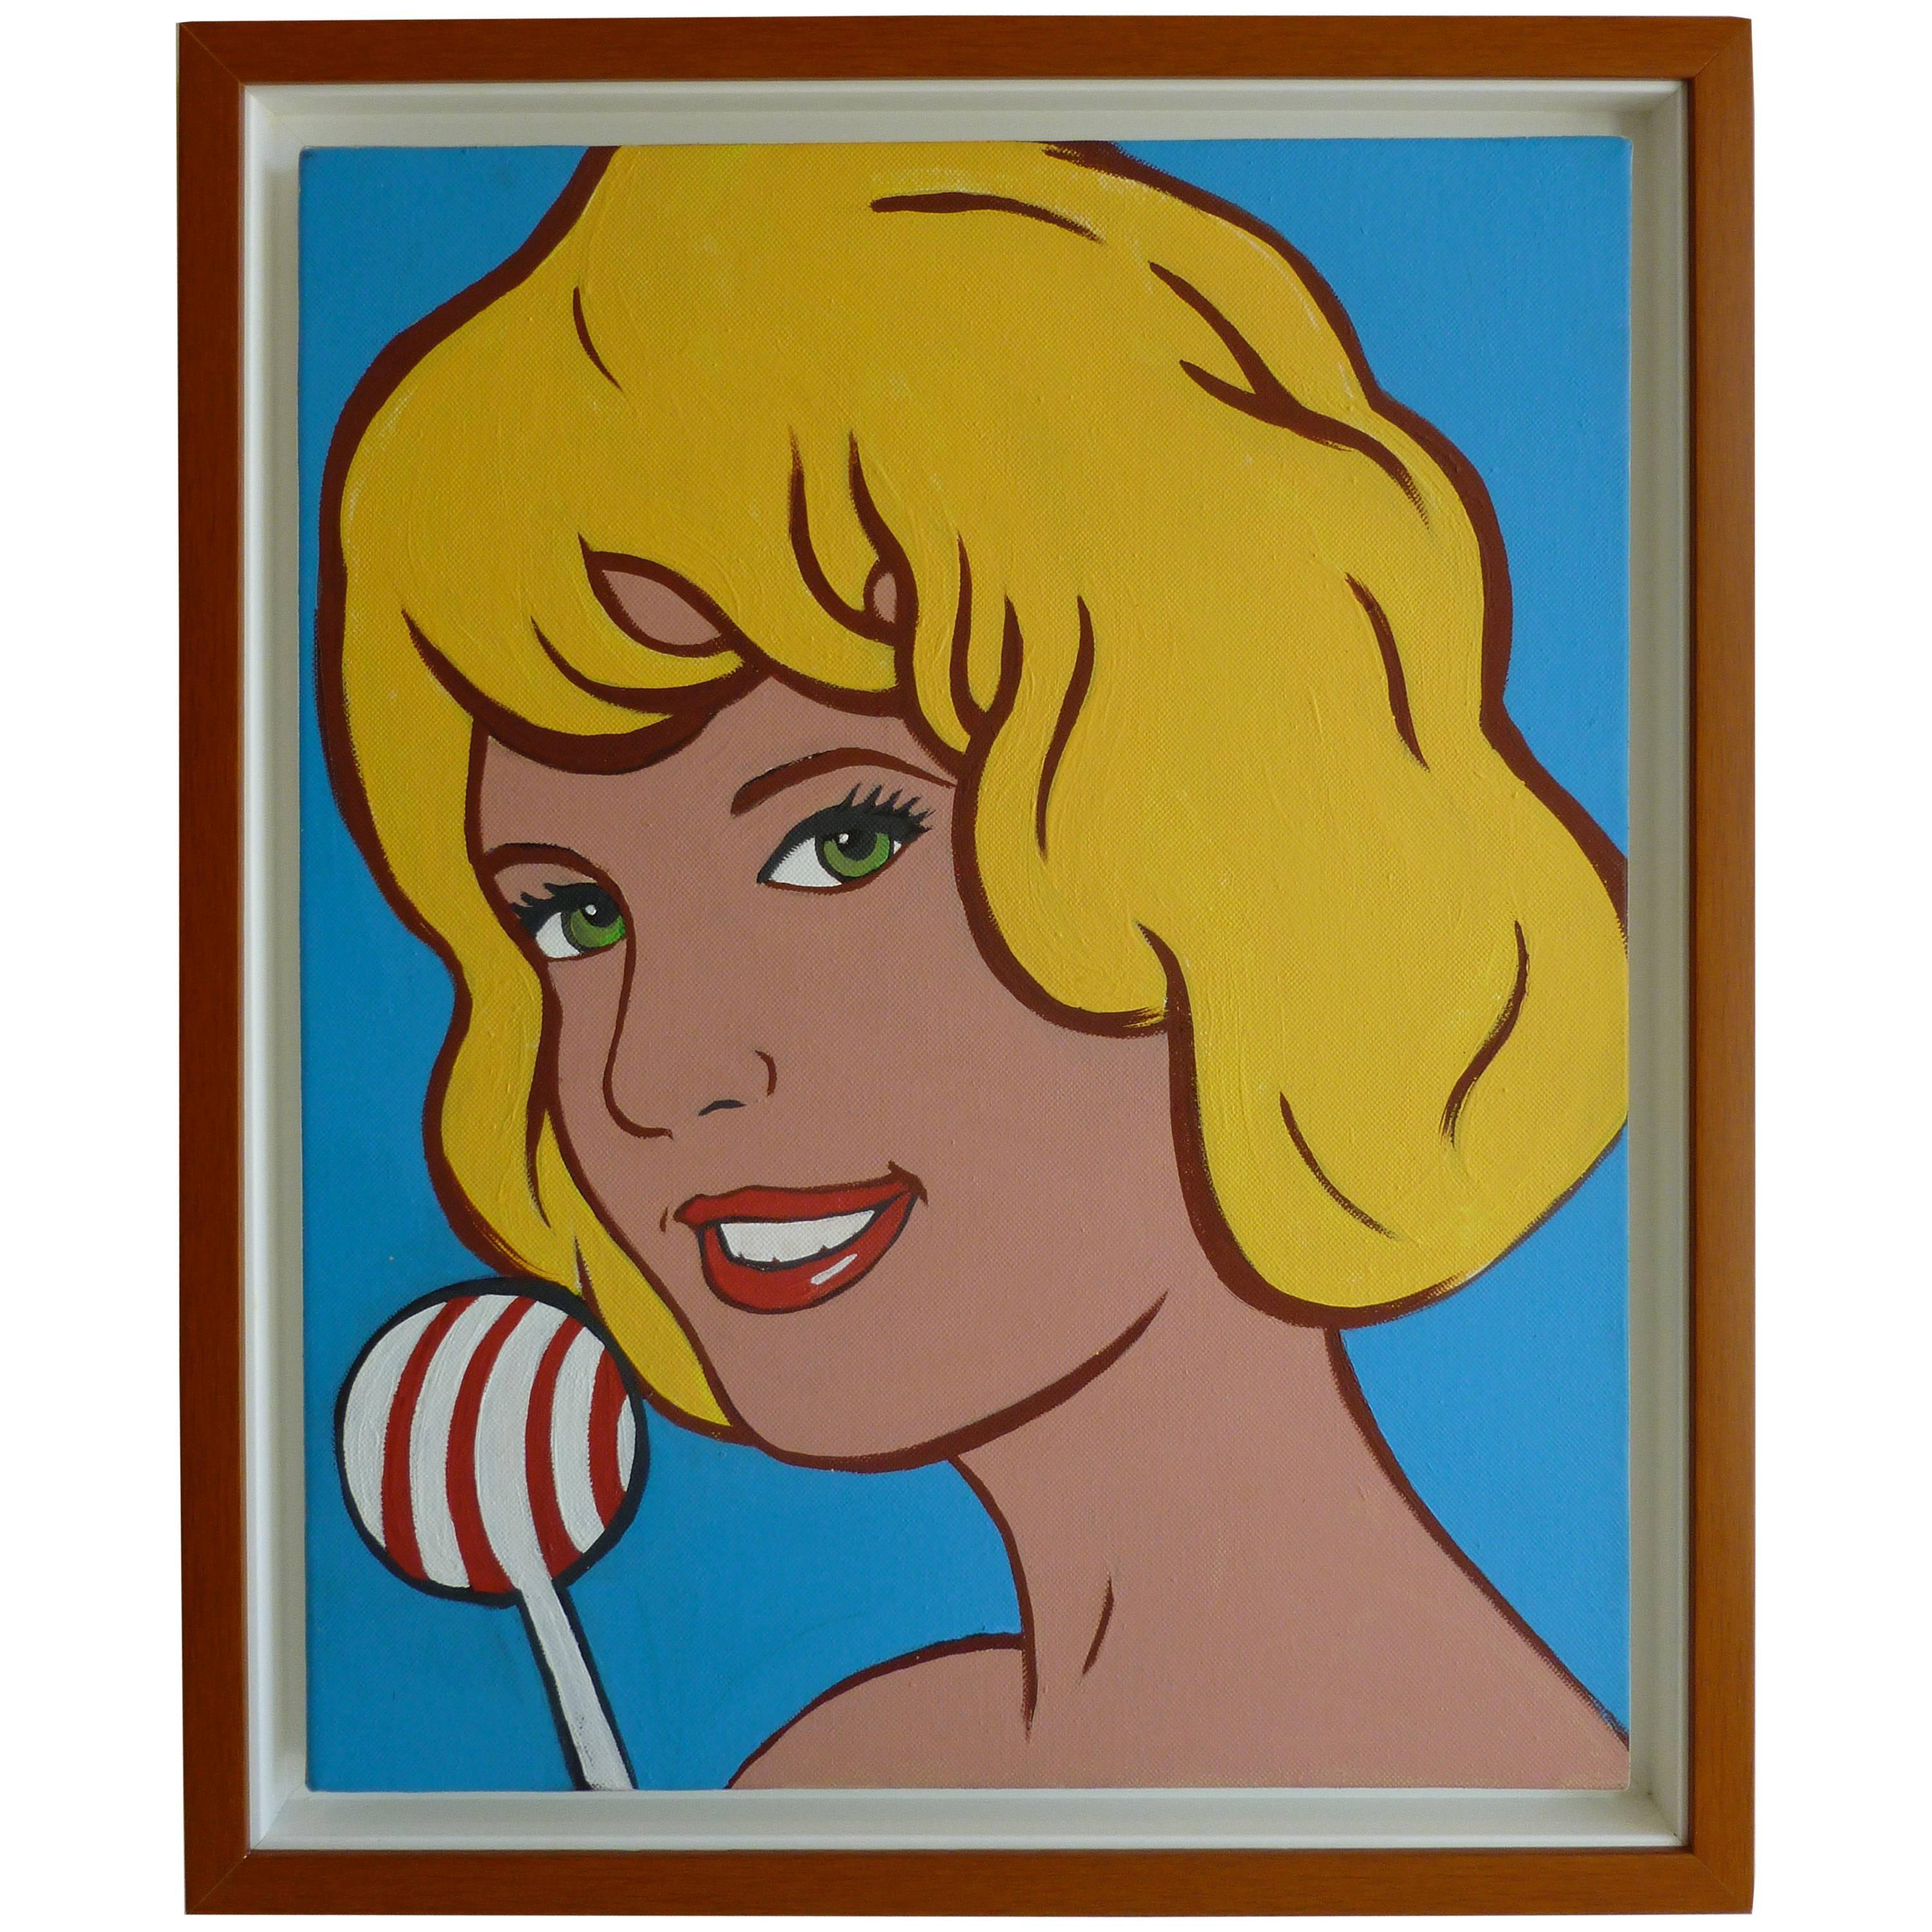  Marjorie Strider Acrylic on Canvas Pop Art Painting Entitled "Lunch" 